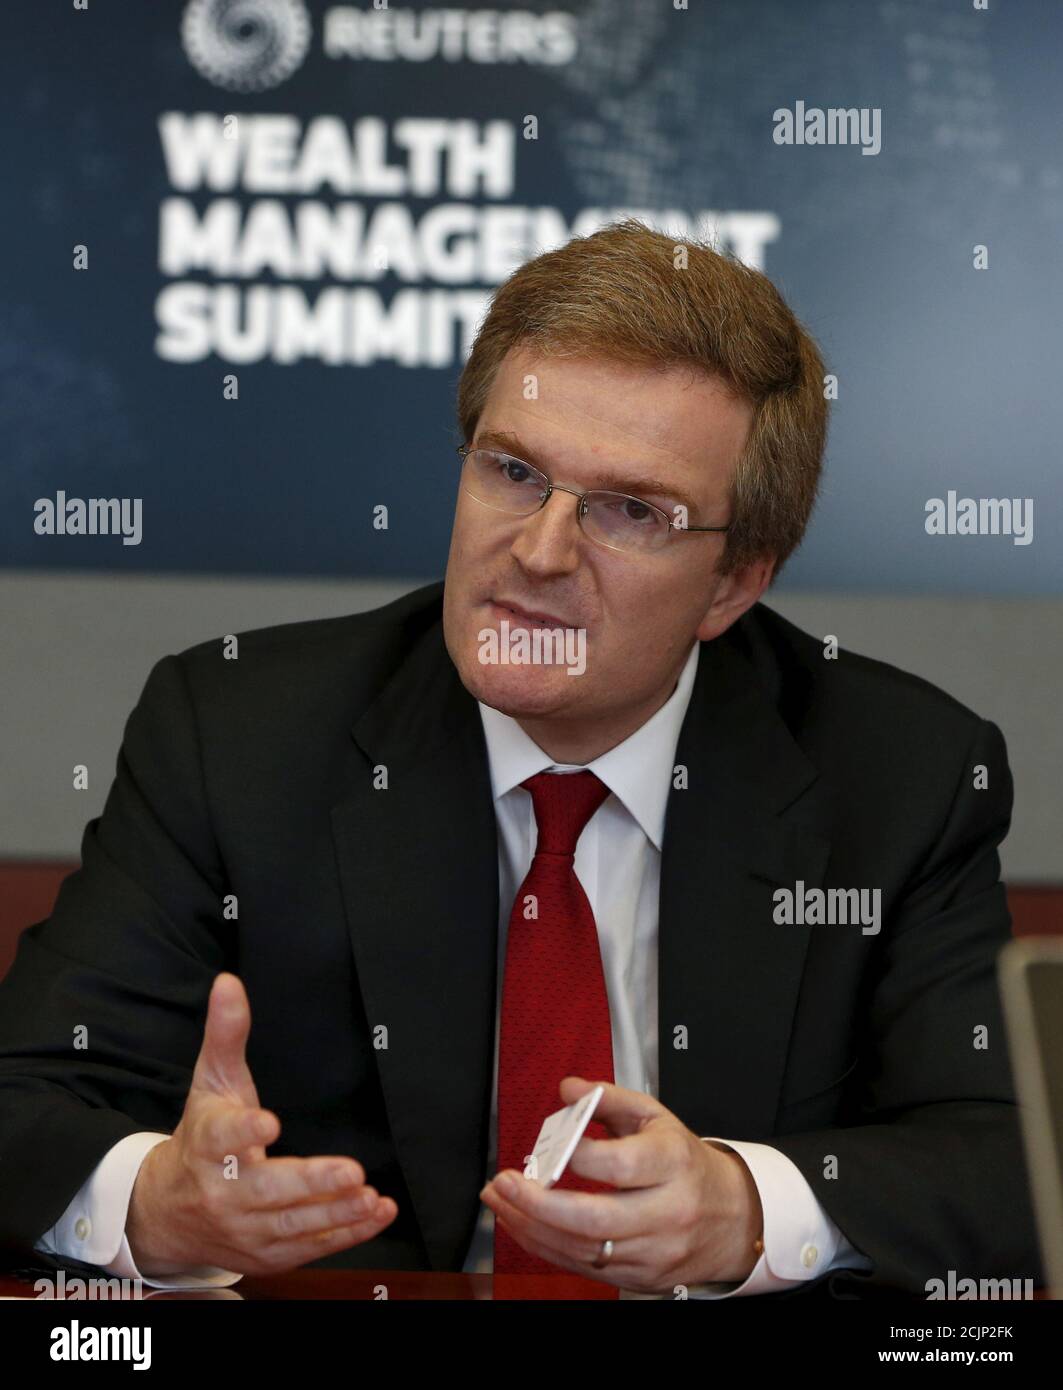 Peter Charrington, Global Head of Citi Private Bank, answers a question during the Reuters Global Wealth Management Summit in New York June 8, 2015.  REUTERS/Shannon Stapleton Stock Photo